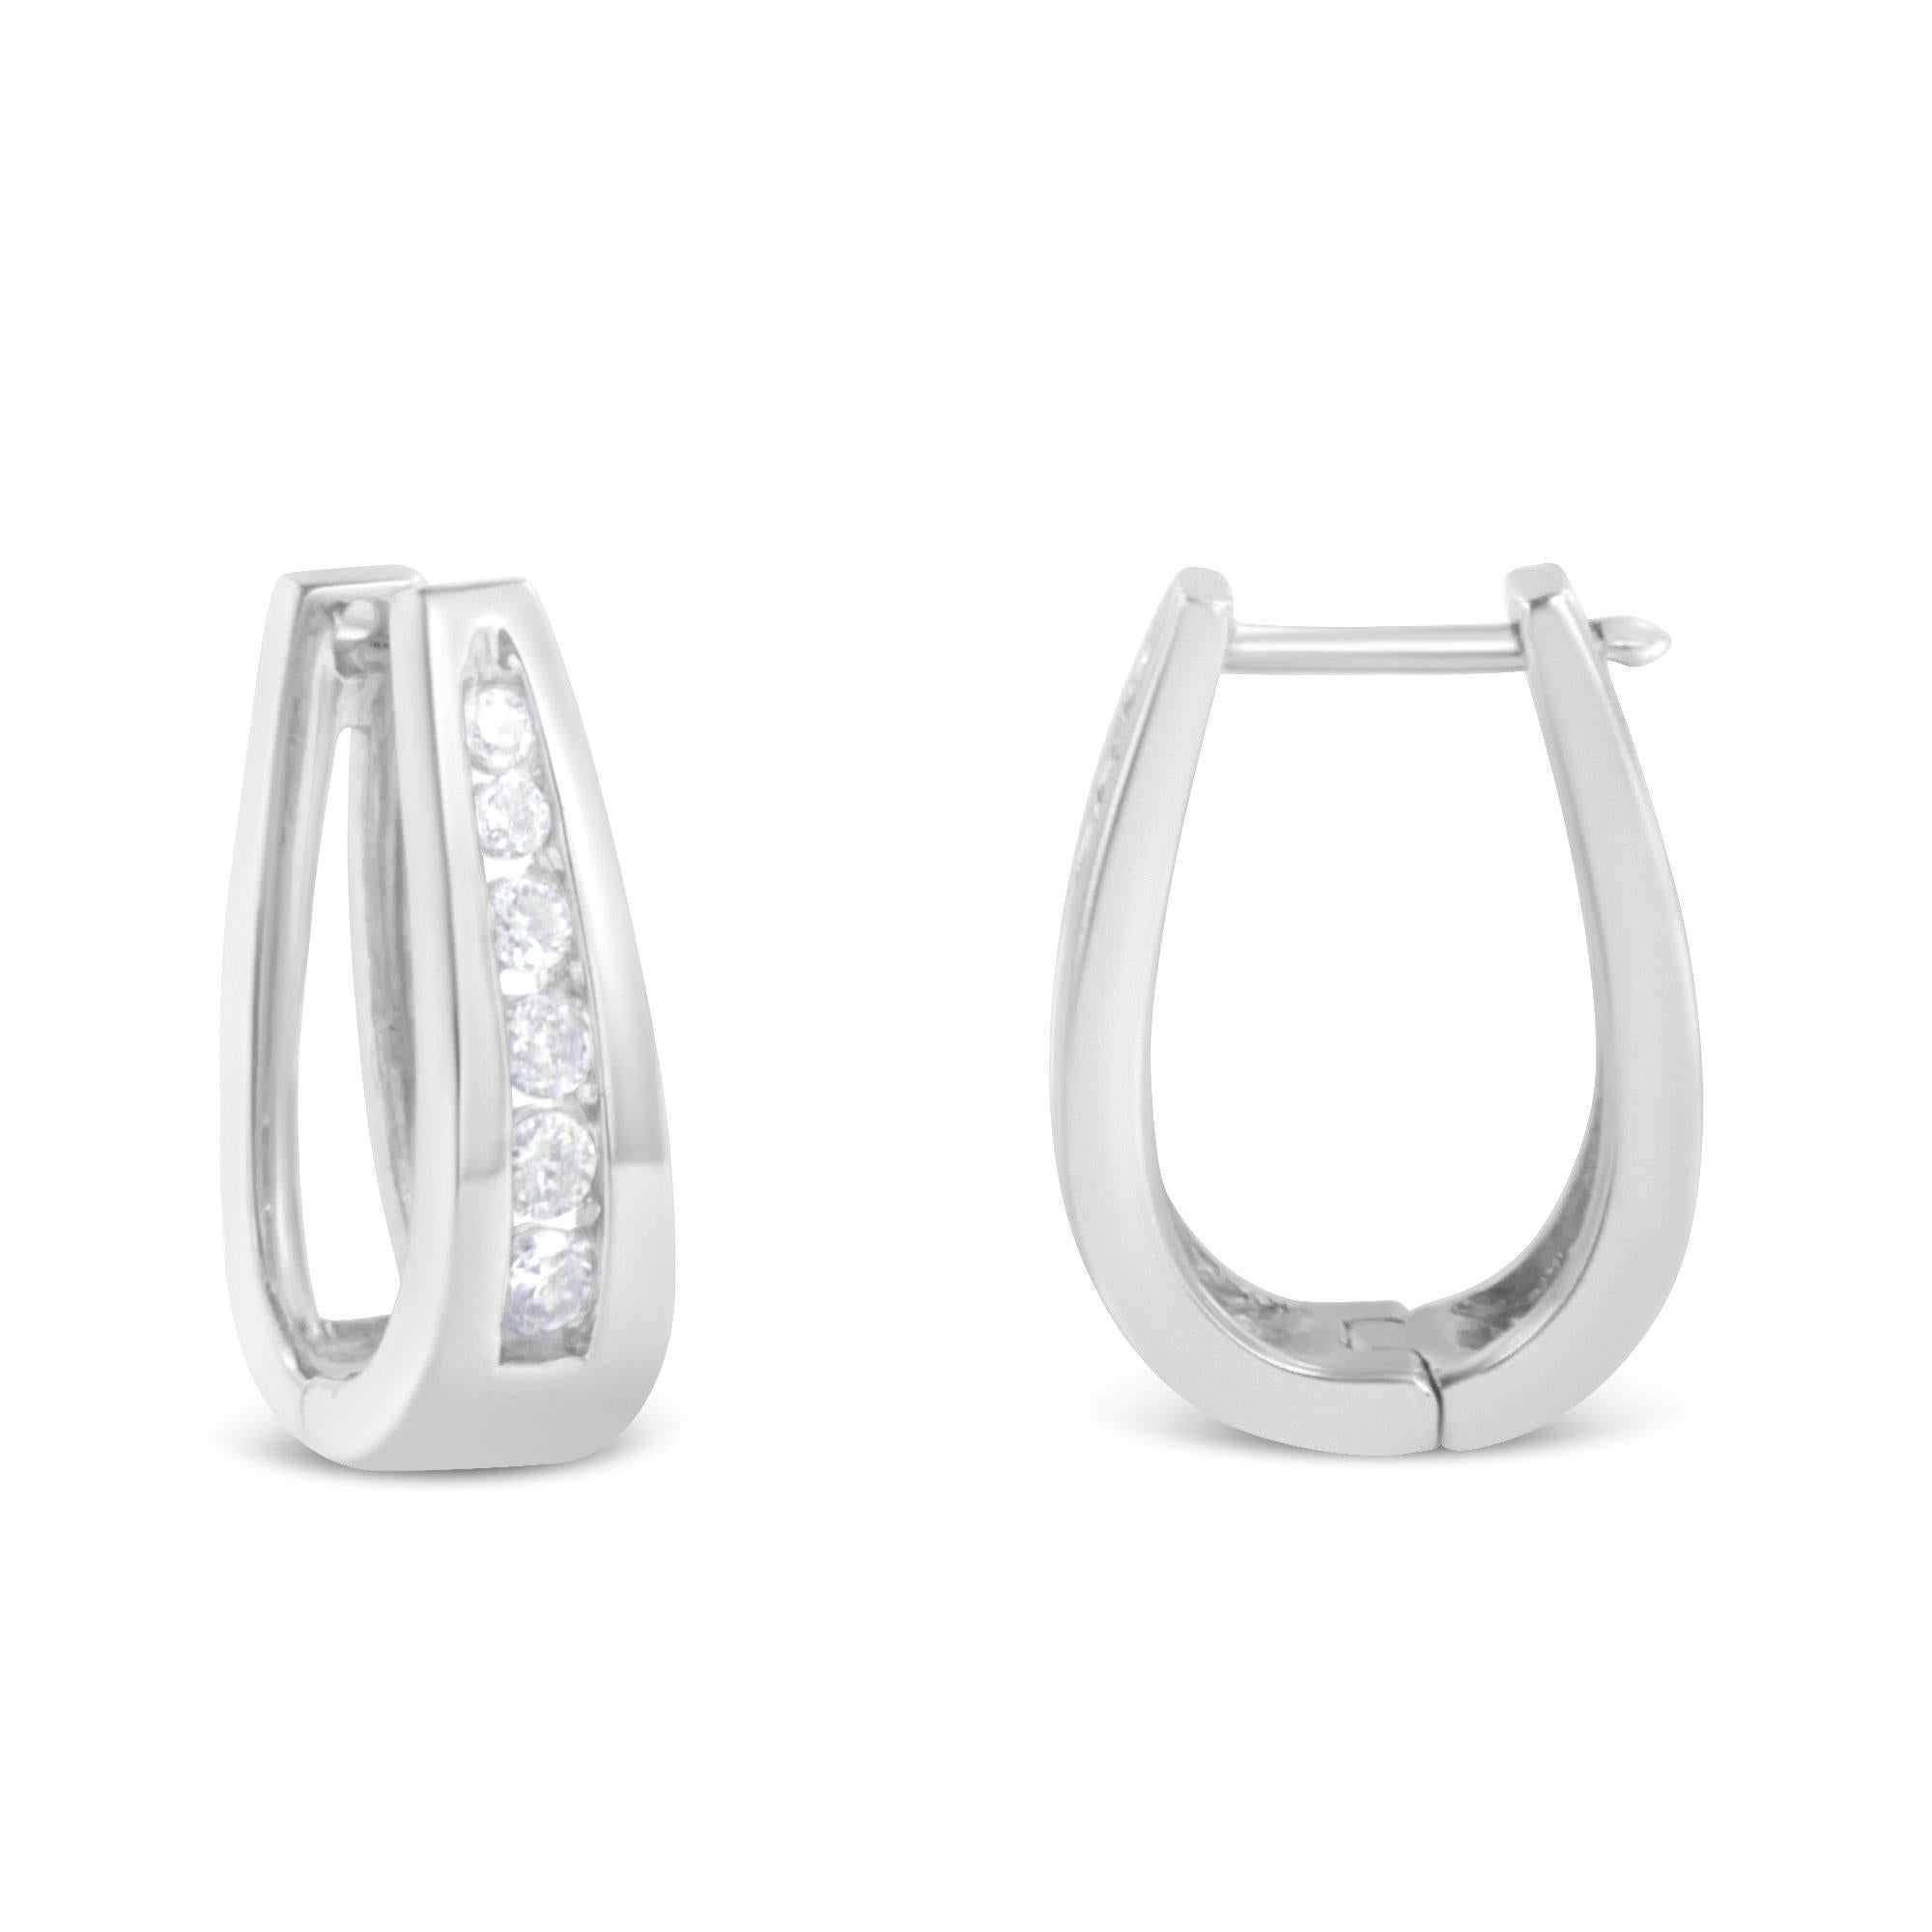 Round Cut Diamond Huggies Earrings Round Brilliant Cut 0.5 Carats 14K White Gold For Sale